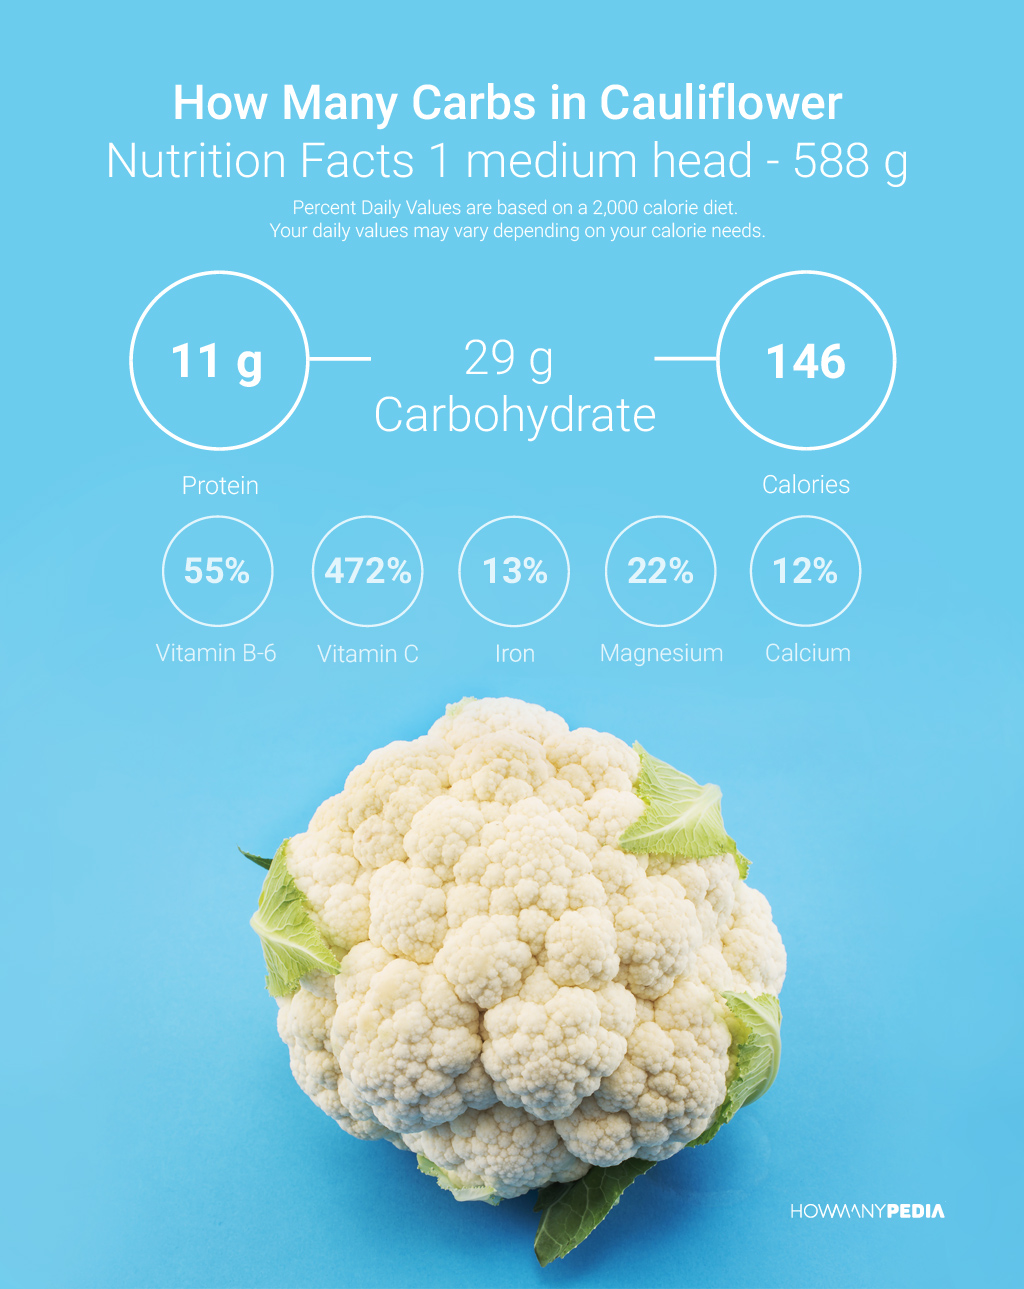 How Many Carbs in Cauliflower Nutrition Facts